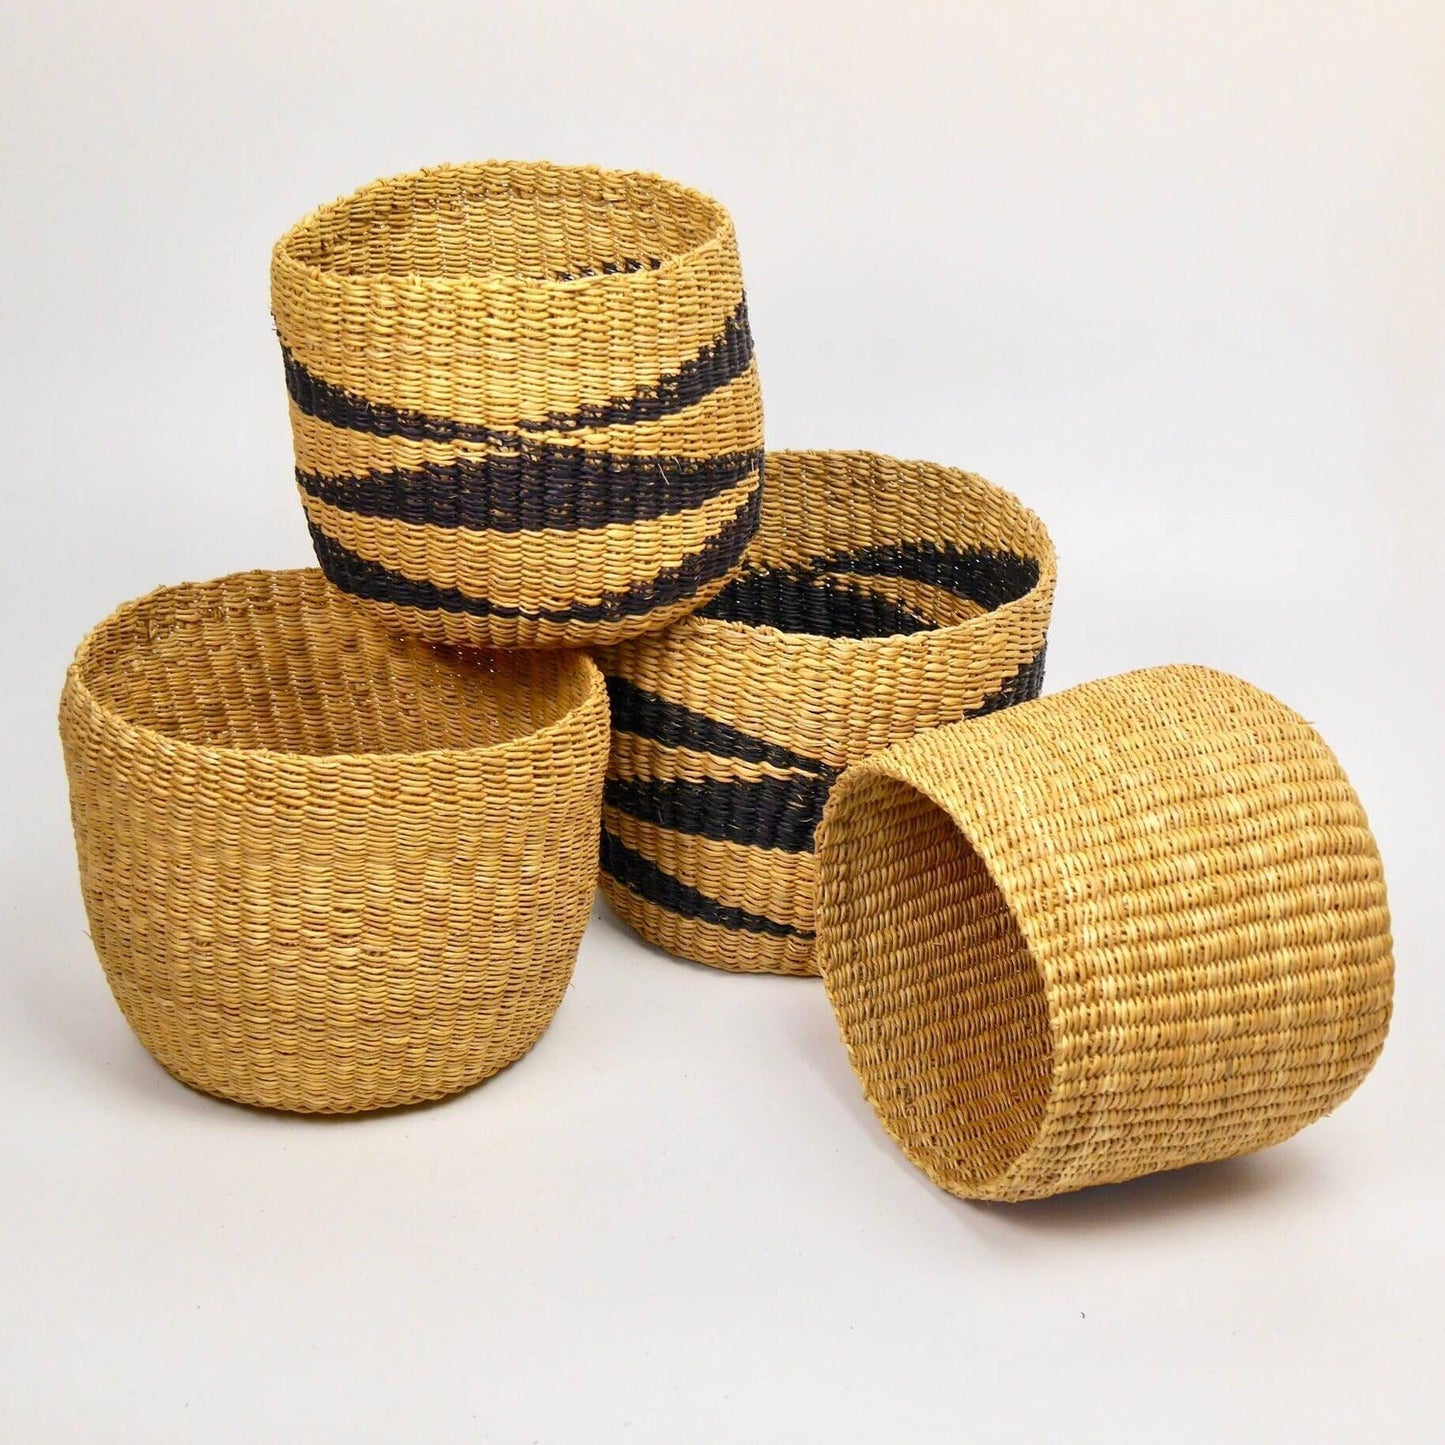 African Plant Pot Basket - Small Living Mamaa Trade Small - Black Triangle Prettycleanshop